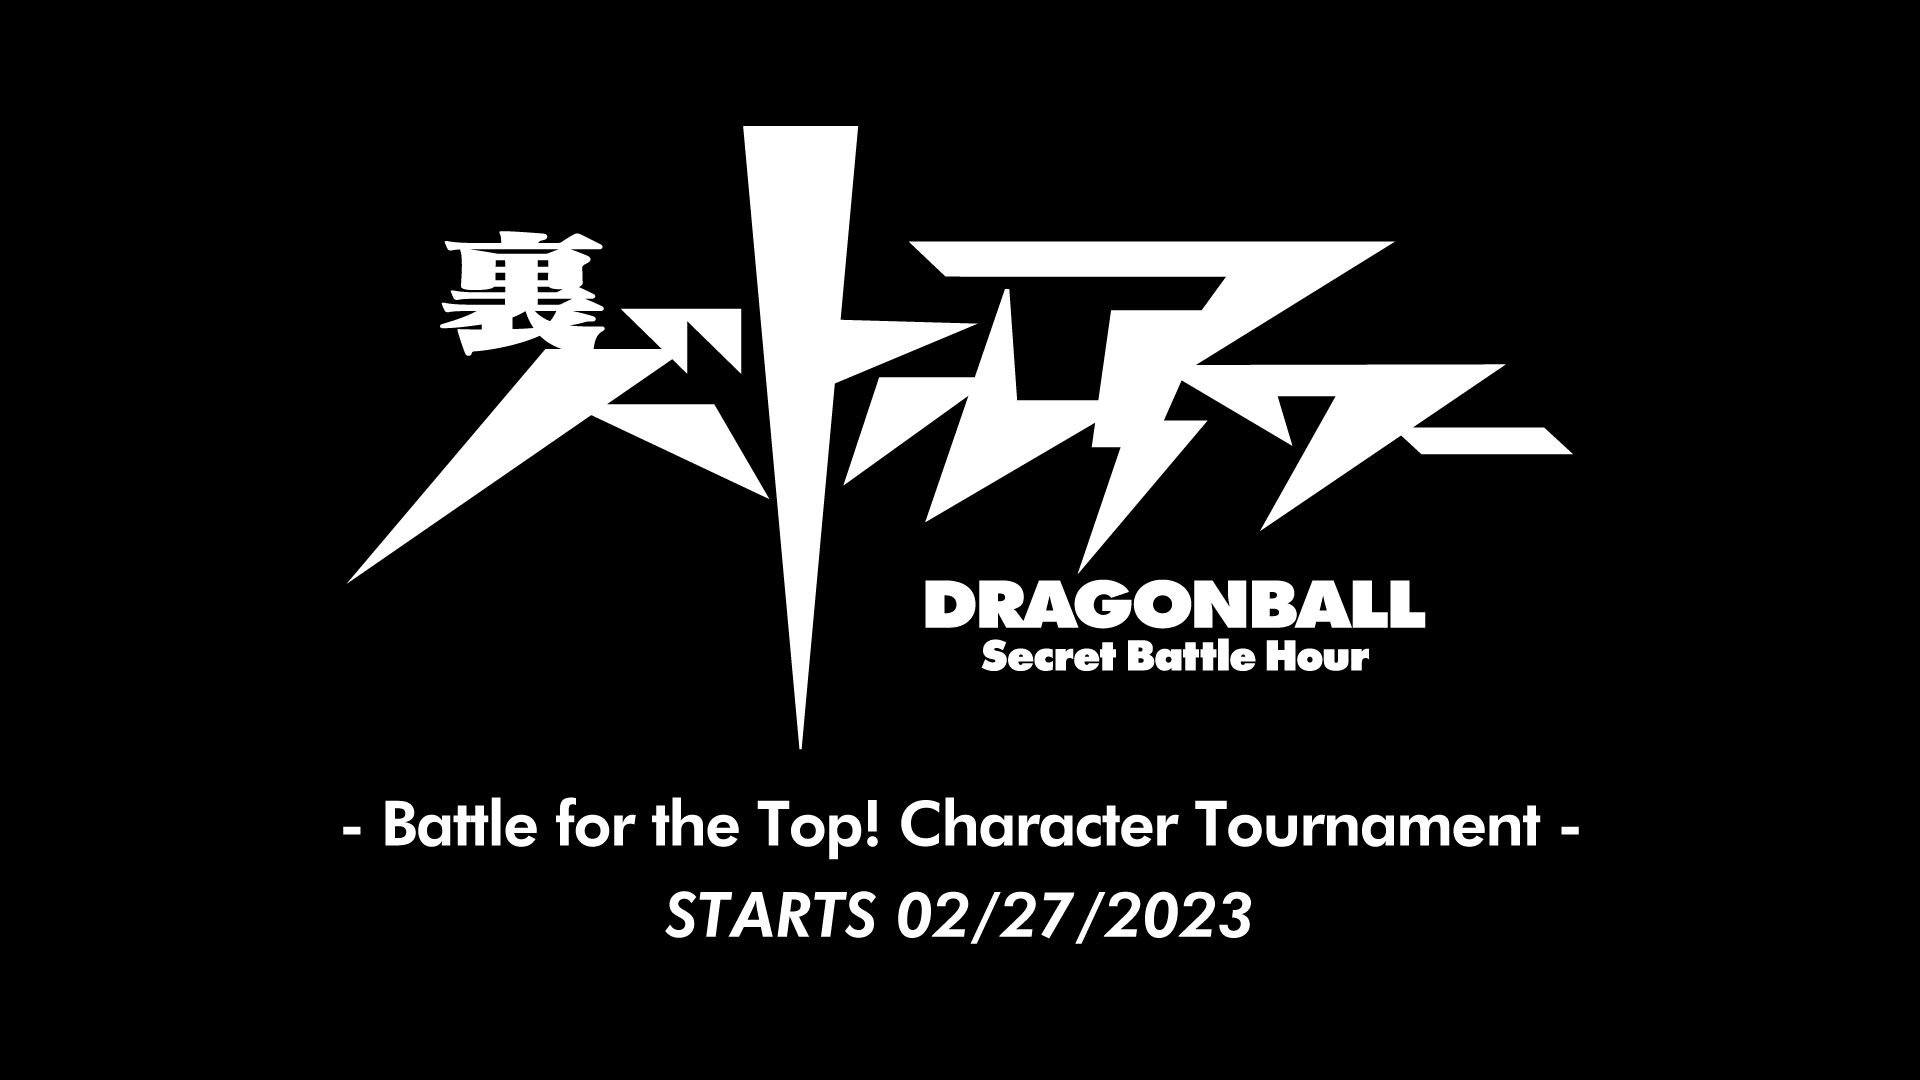 Who Do YOU Think Is the Strongest Character?! Secret Battle Hour Coming Soon!